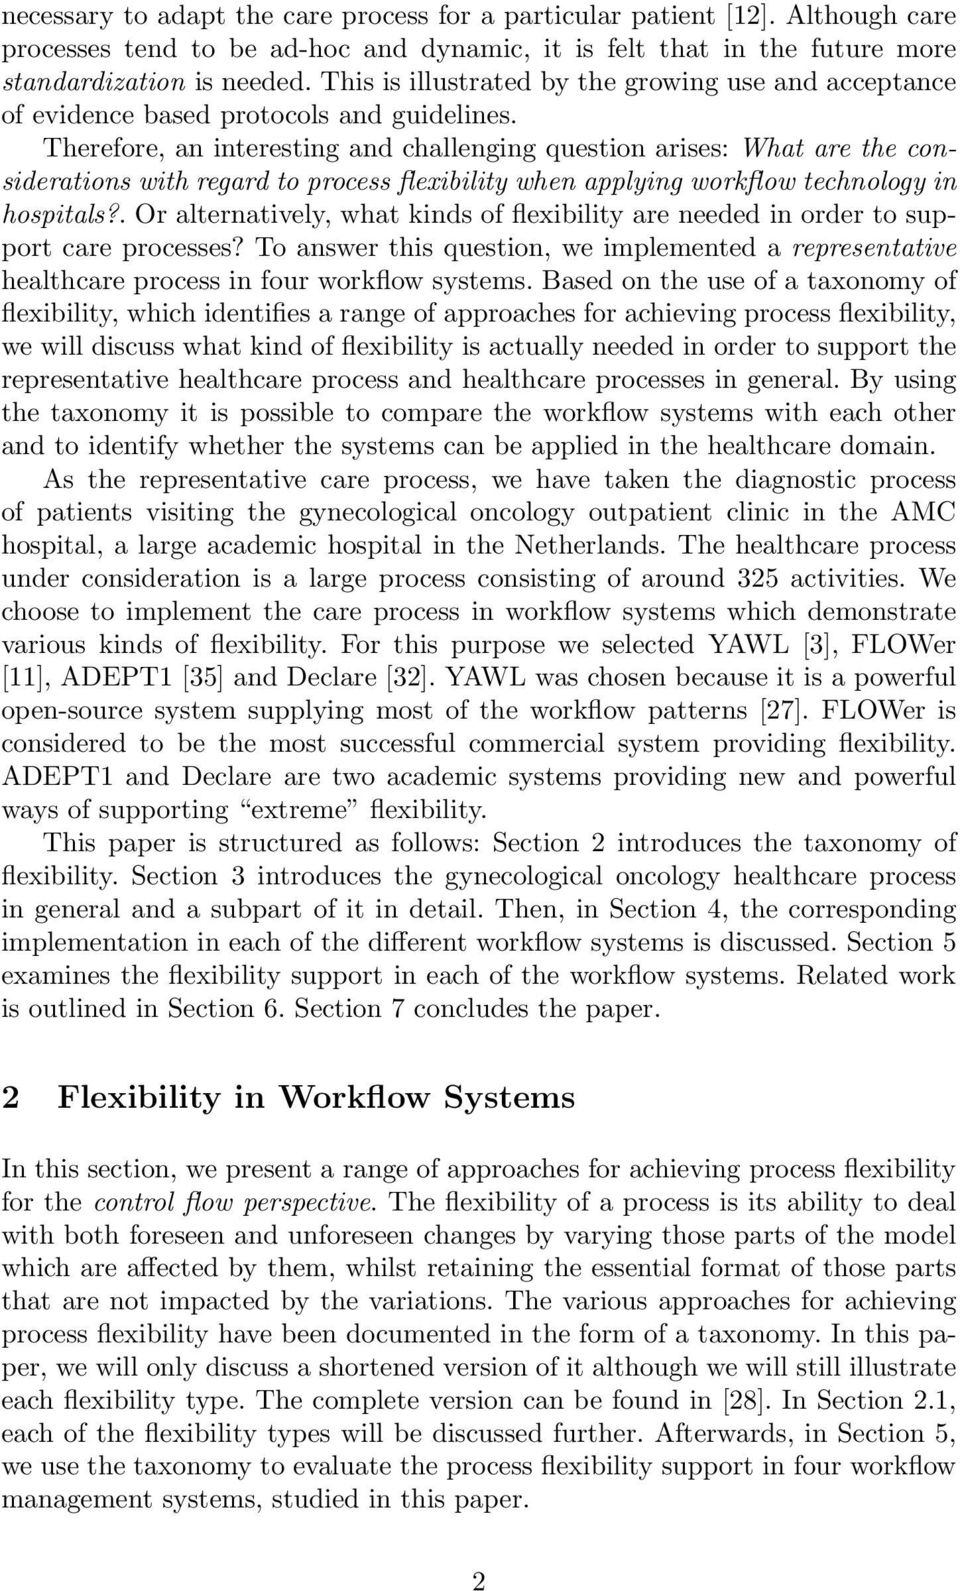 Therefore, an interesting and challenging question arises: What are the considerations with regard to process flexibility when applying workflow technology in hospitals?